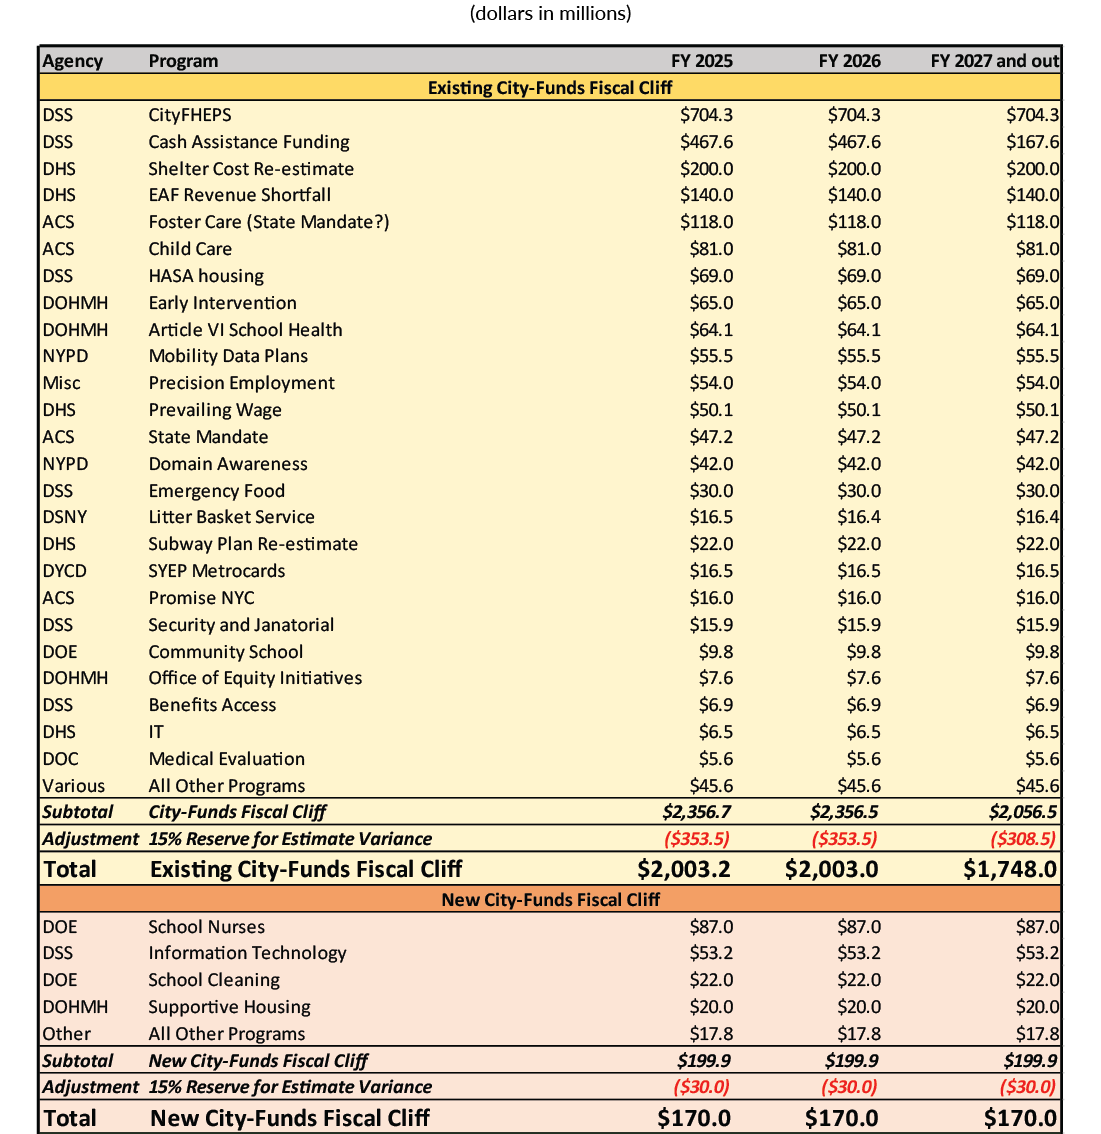 City-Funds, Federal-Funds Fiscal Cliff, and Underbudgeting in the NYC Fiscal Year 2025 Preliminary Budget